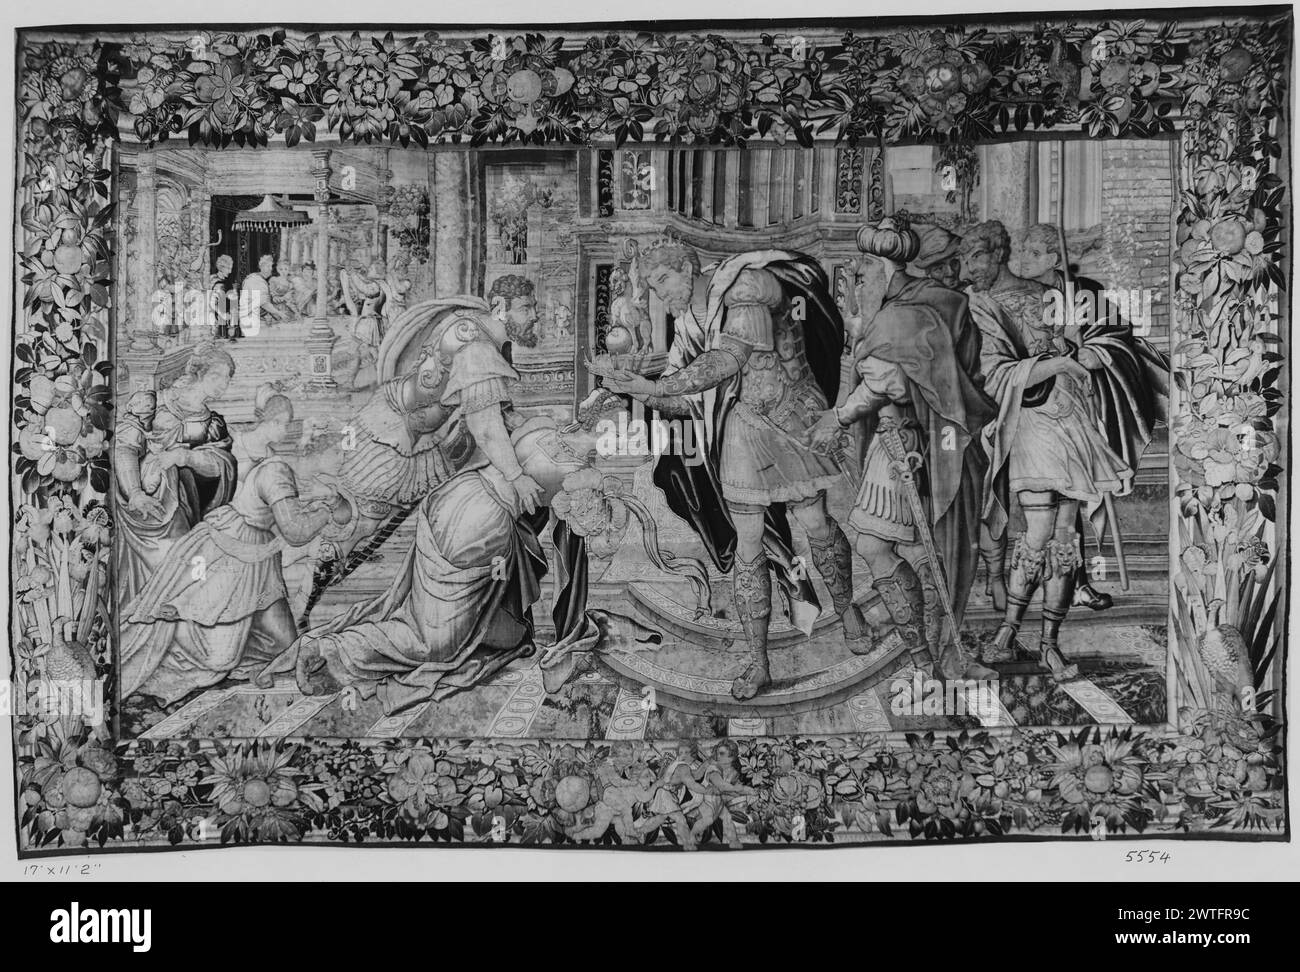 Esther and Ahasuerus: crowning of Esther. unknown c. 1530-1550 Tapestry Dimensions: H 11'2' x W 17' Tapestry Materials/Techniques: unknown Culture: Flemish Weaving Center: Brussels Ownership History: French & Co. received from De Witt, invoiced 7/3/1931; returned from consignment, 8/26/1932. Before architectural setting, Esther becomes queen as she is crowned by Ahasuerus; courtiers surround; L background, Esther's wedding feast (Esther 1-2:20) (BRD) bunches of oversize flowers & fruit against central palm tree trunk motif; (L & R BRD) large birds; fronds springing at bottom; (LWR BRD) centere Stock Photo